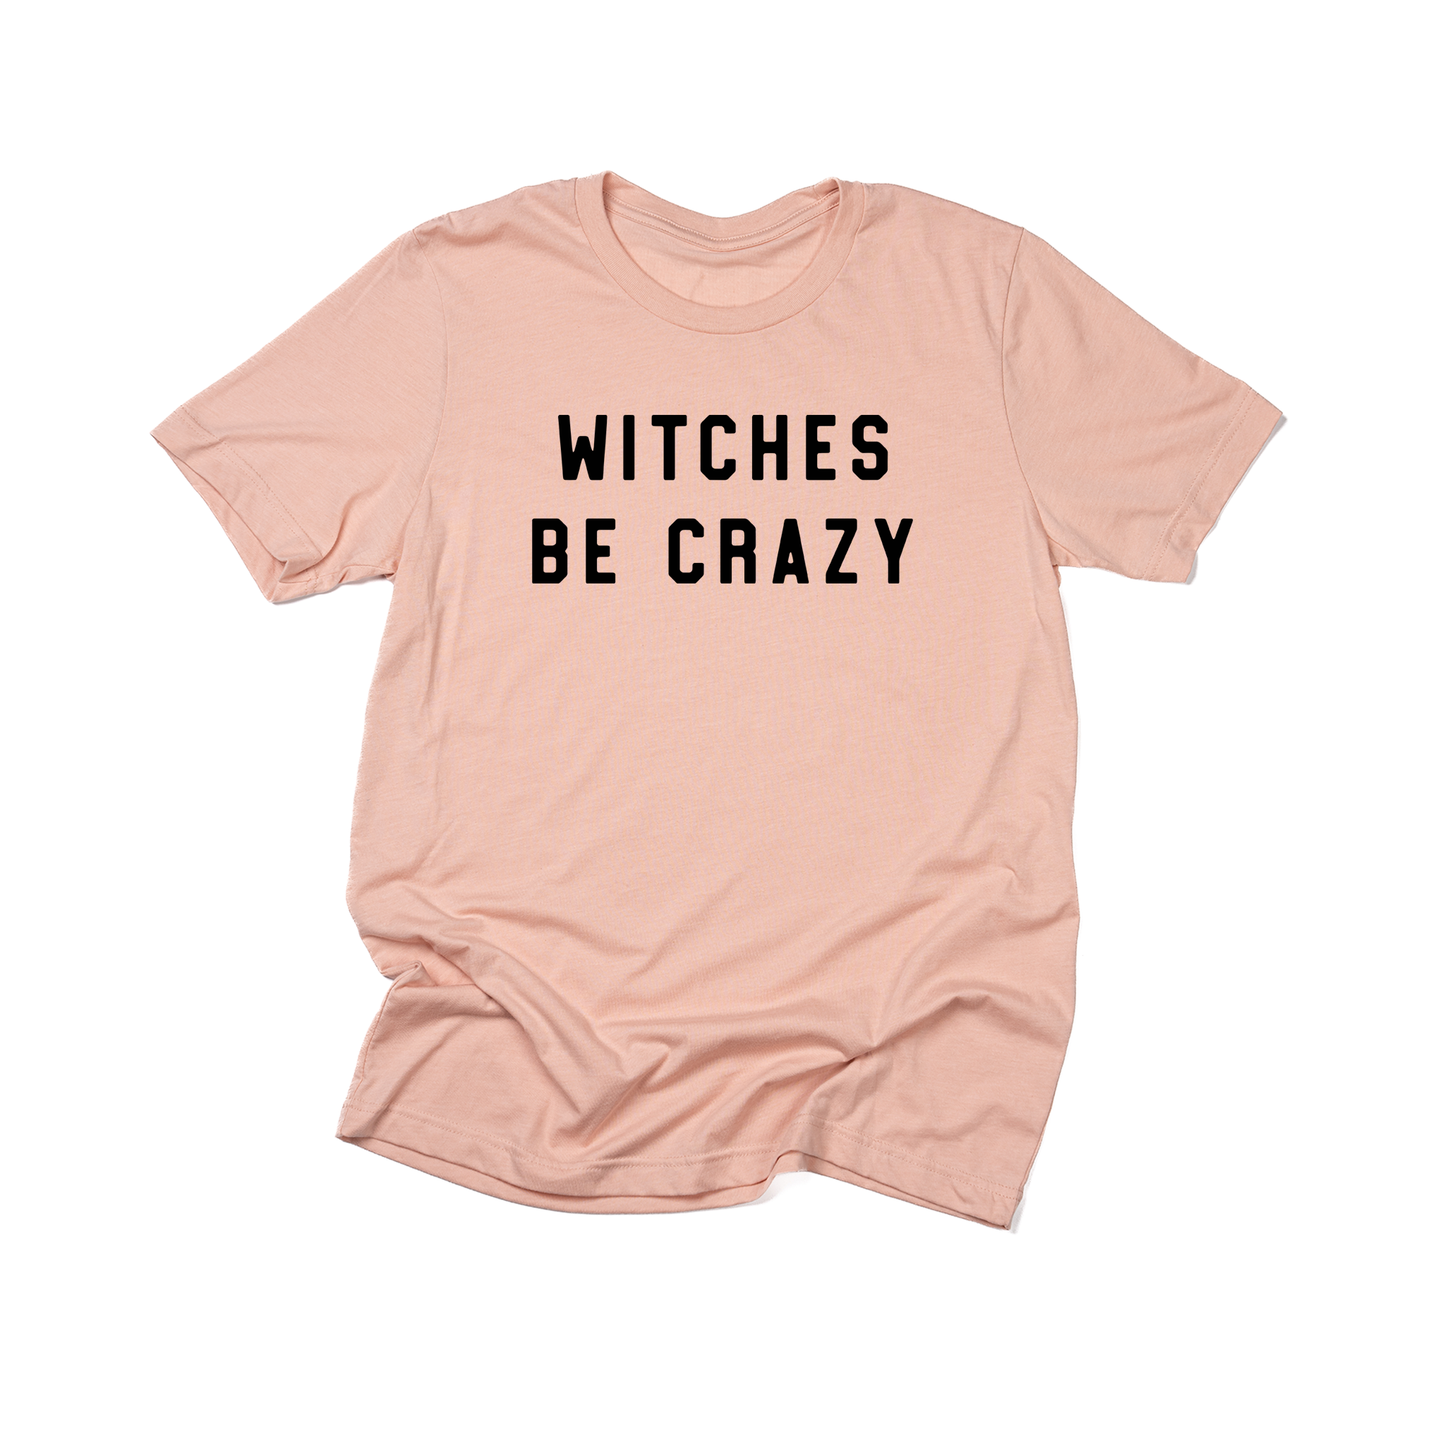 Witches Be Crazy (Black) - Tee (Peach)